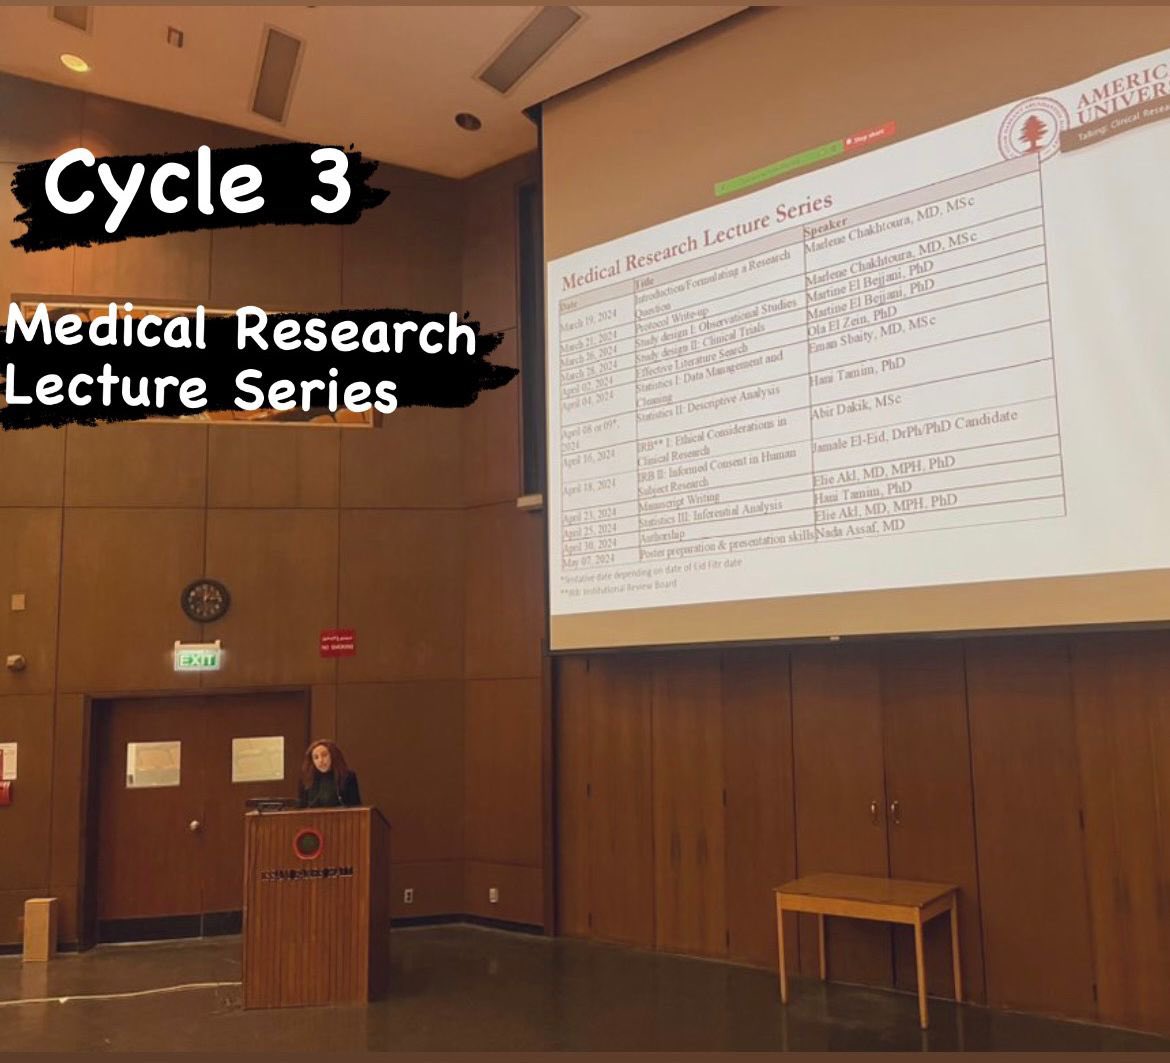 A very successful start of our “Medical Research Lecture Series” cycle 3 with Dr. @Marlene__ch presenting on “Formulating a research question” @AUB_Lebanon @AUBMC_Official @martinebejjani @HakimLara @Elie__Akl